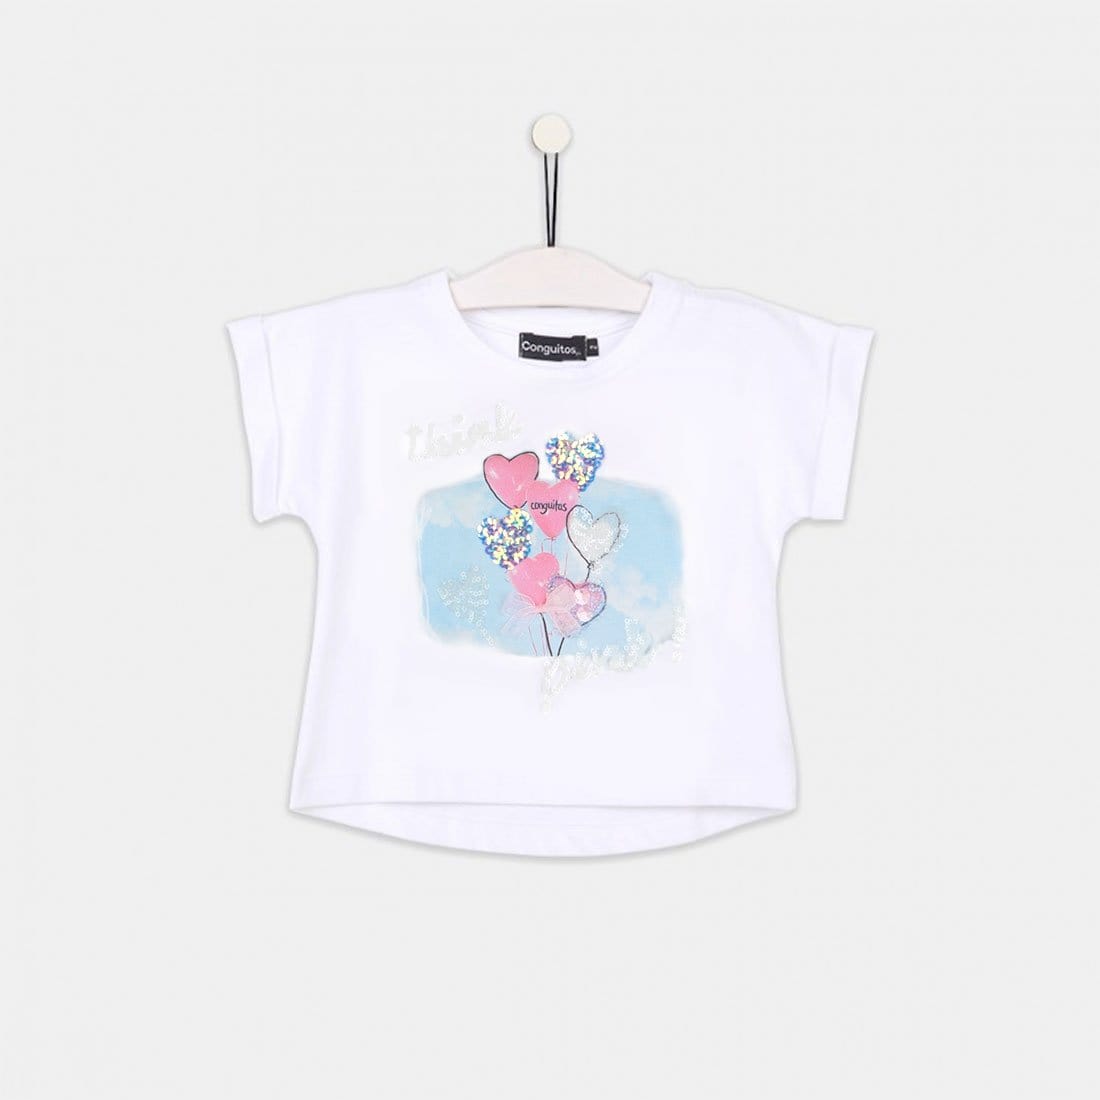 CONGUITOS TEXTIL Clothing Girls "Balloons" Glitter Glow in the dark T-shirt